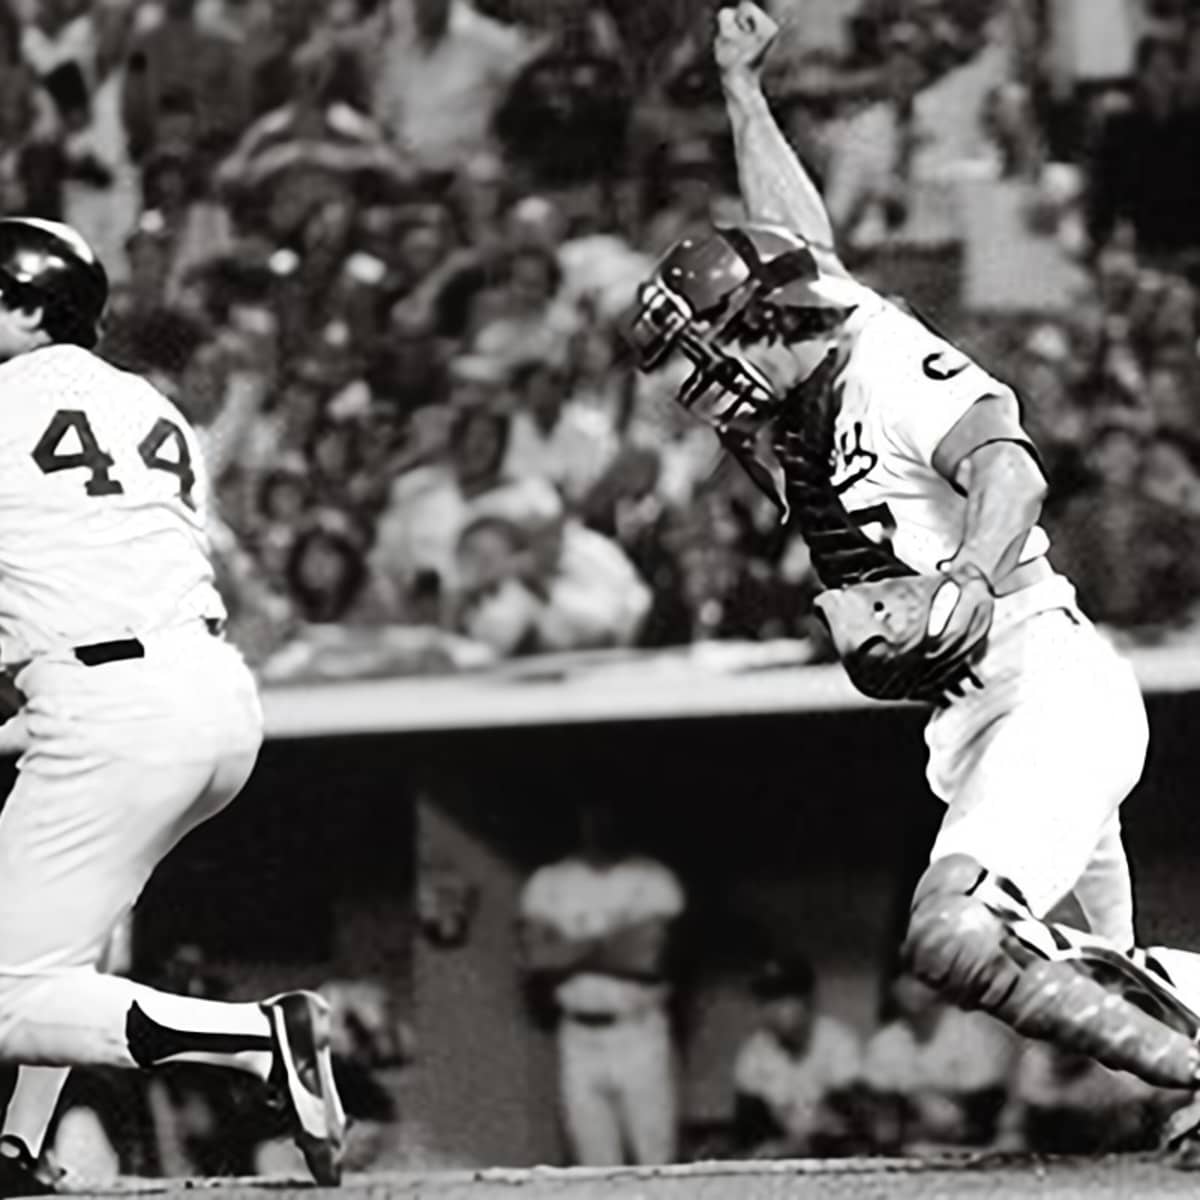 On this day in 1977, Reggie Jackson became known as Mr. October when he  hit three consecutive home runs in Game 6 of the World Series.